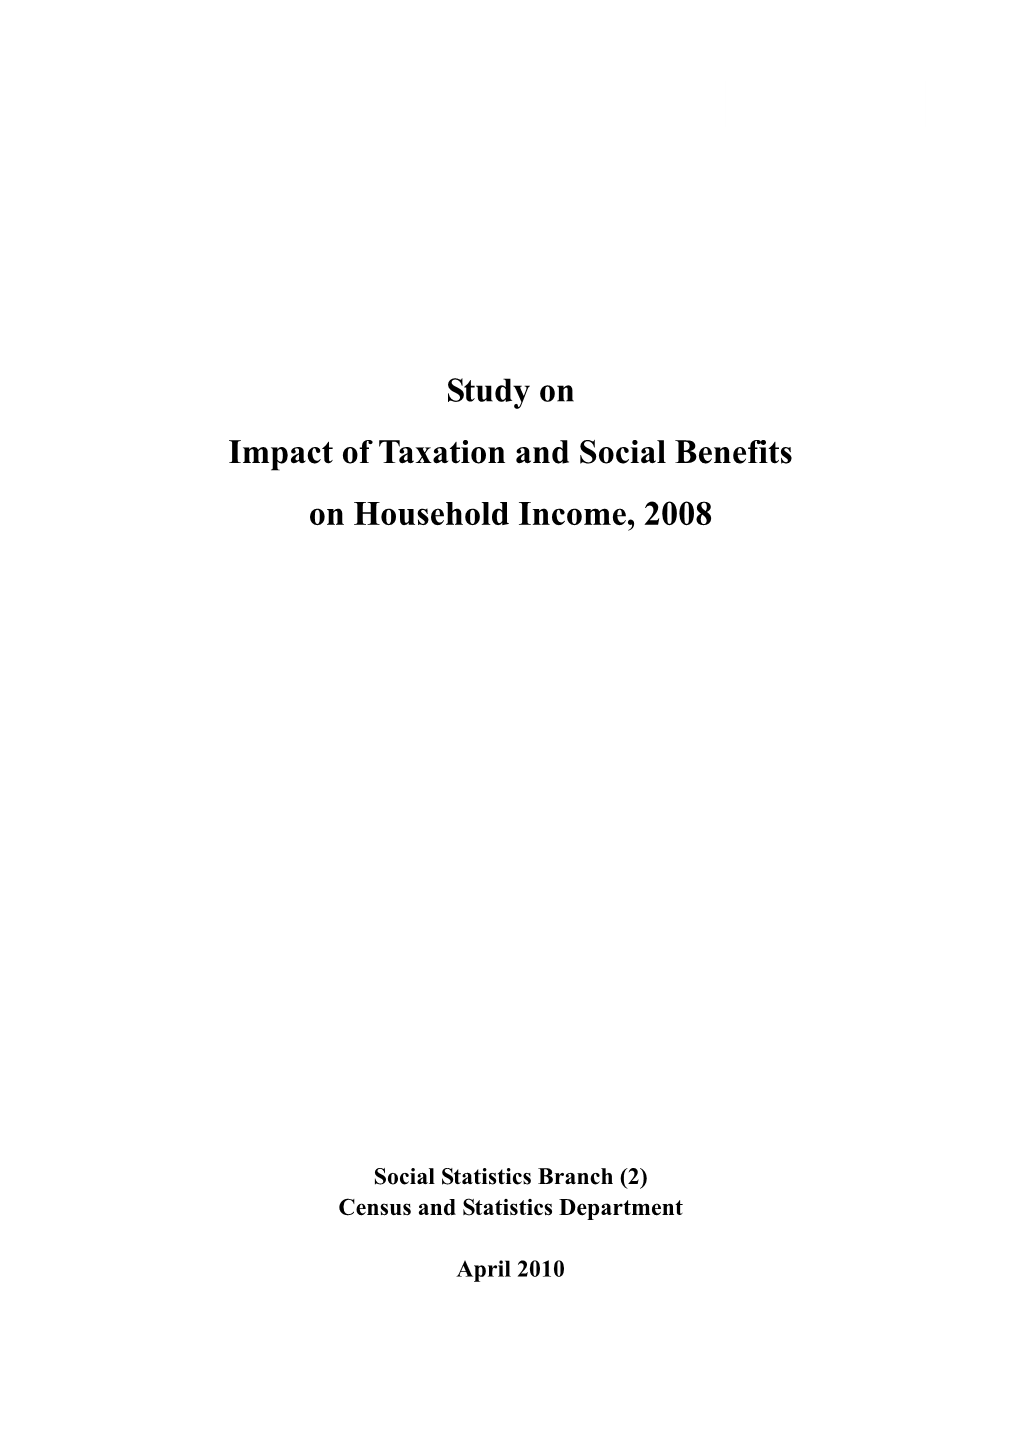 Study on Impact of Taxation and Social Benefits on Household Income, 2008